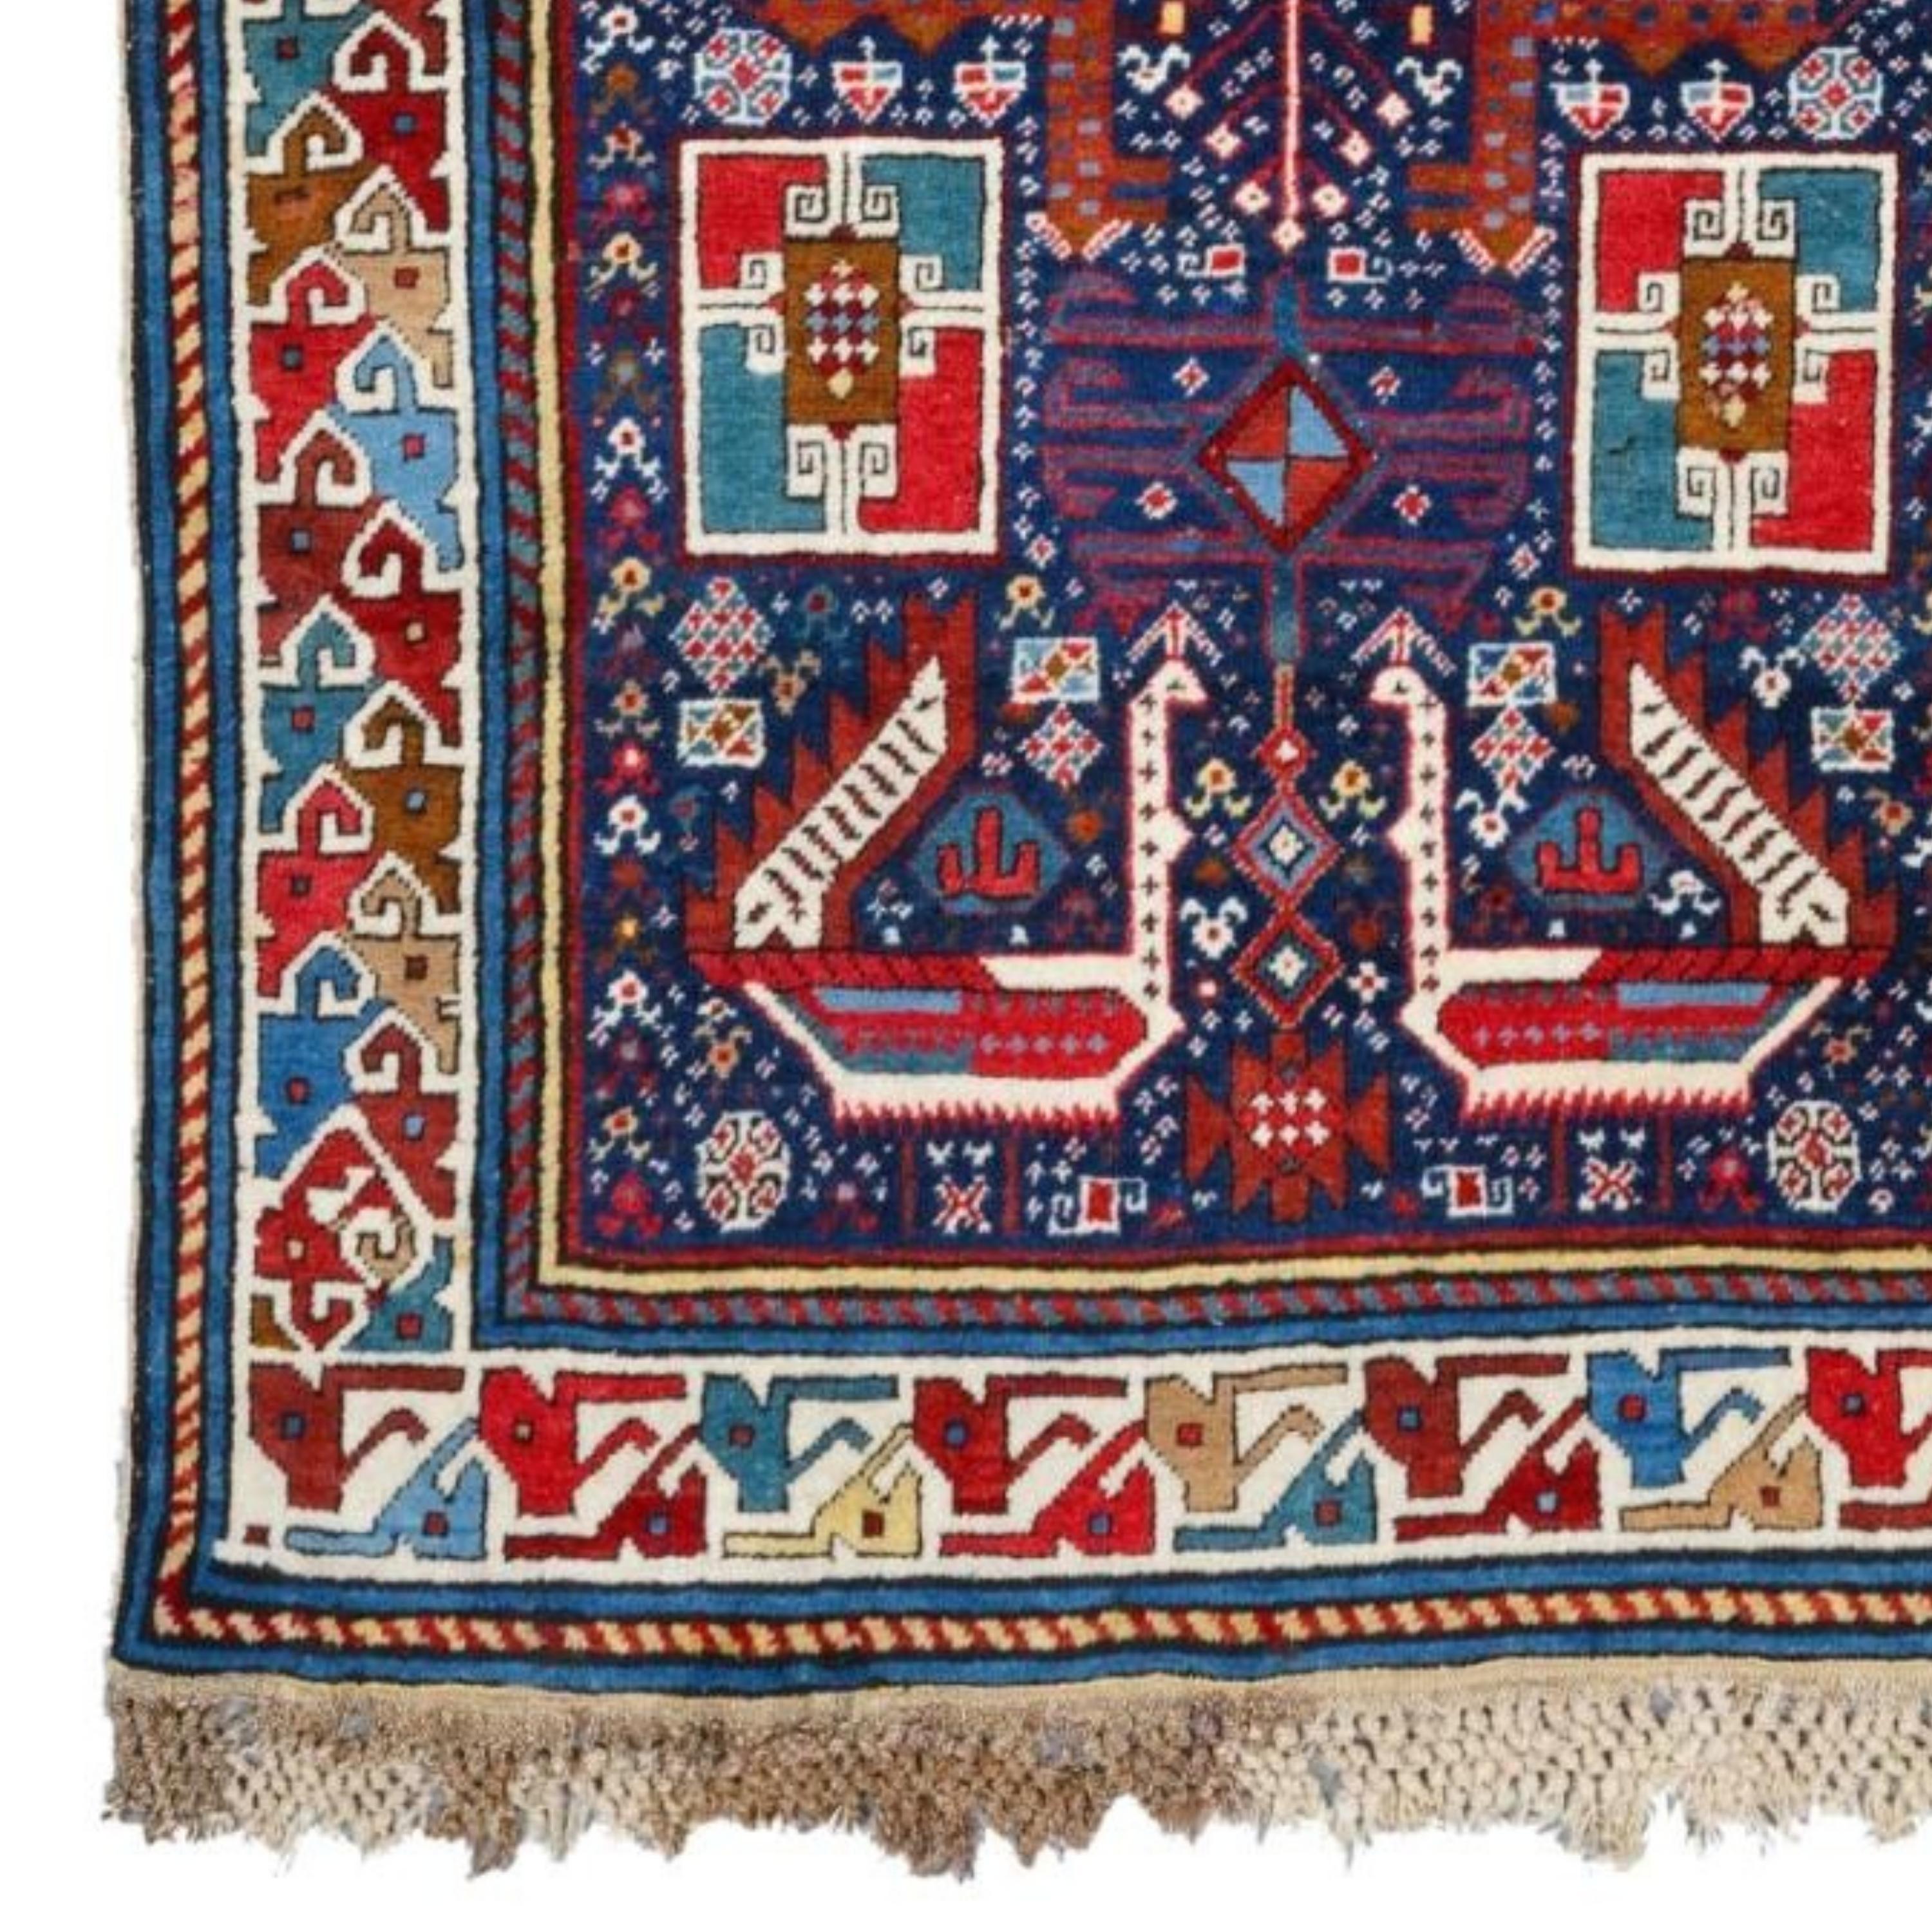 Antique Akstafa Rug - Middle of 19th Century Caucasian Akstafa Rug Size 105 x 270 cm (3,44 - 8,85 ft)

Antique Caucasian Akstafa long rug with three star medallions and birds.
Circa 1880.
This is a good example of a well known group of long rugs